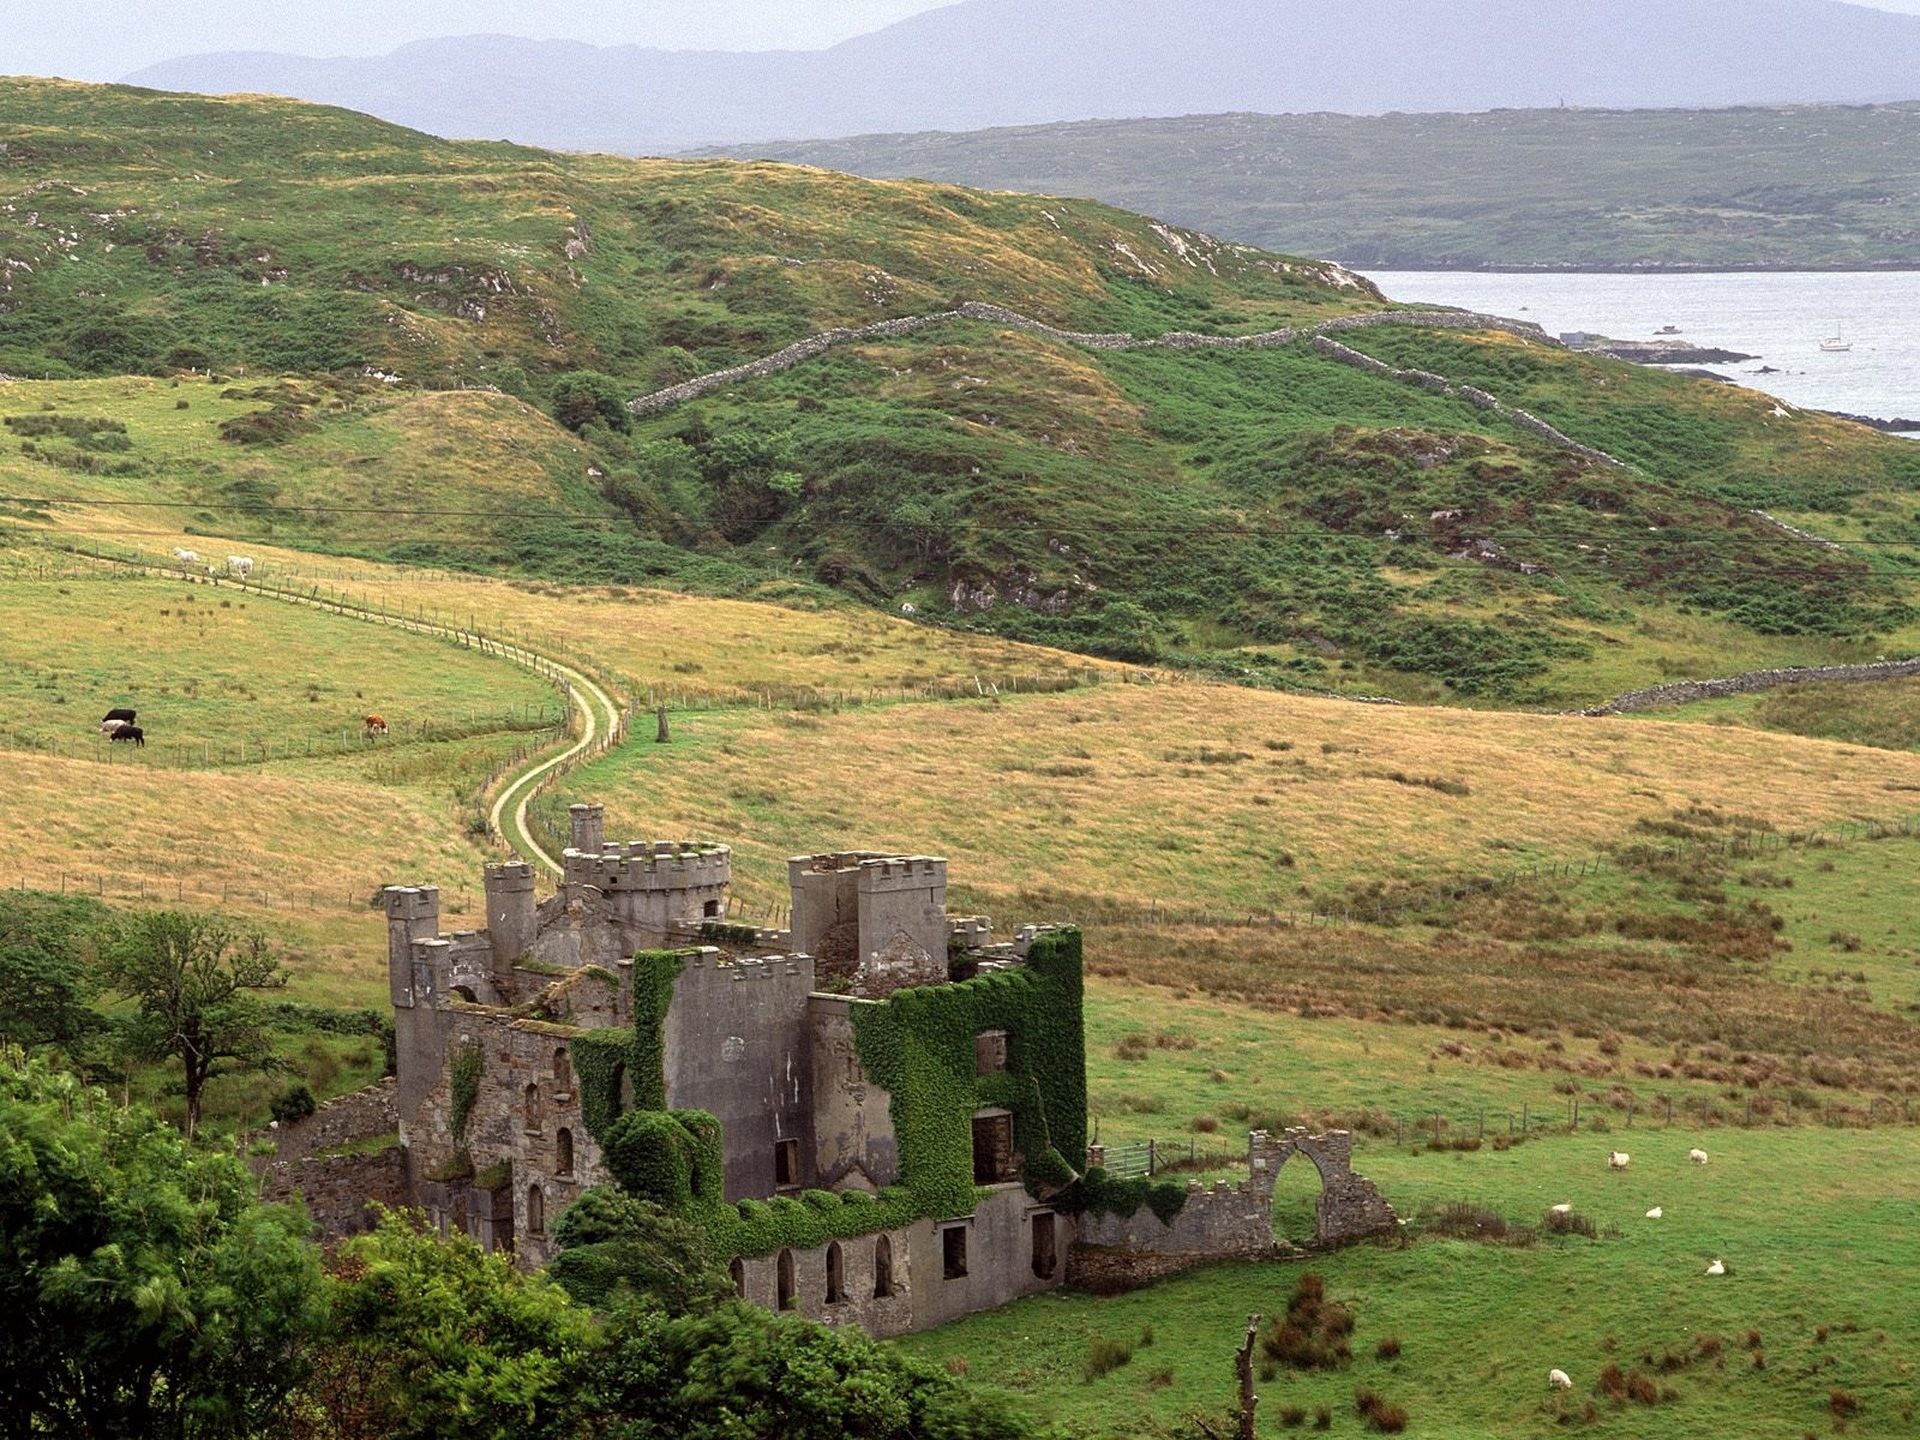 1920x1440 Download This Wallpaper! Clifden Castle County Galway Ireland ...